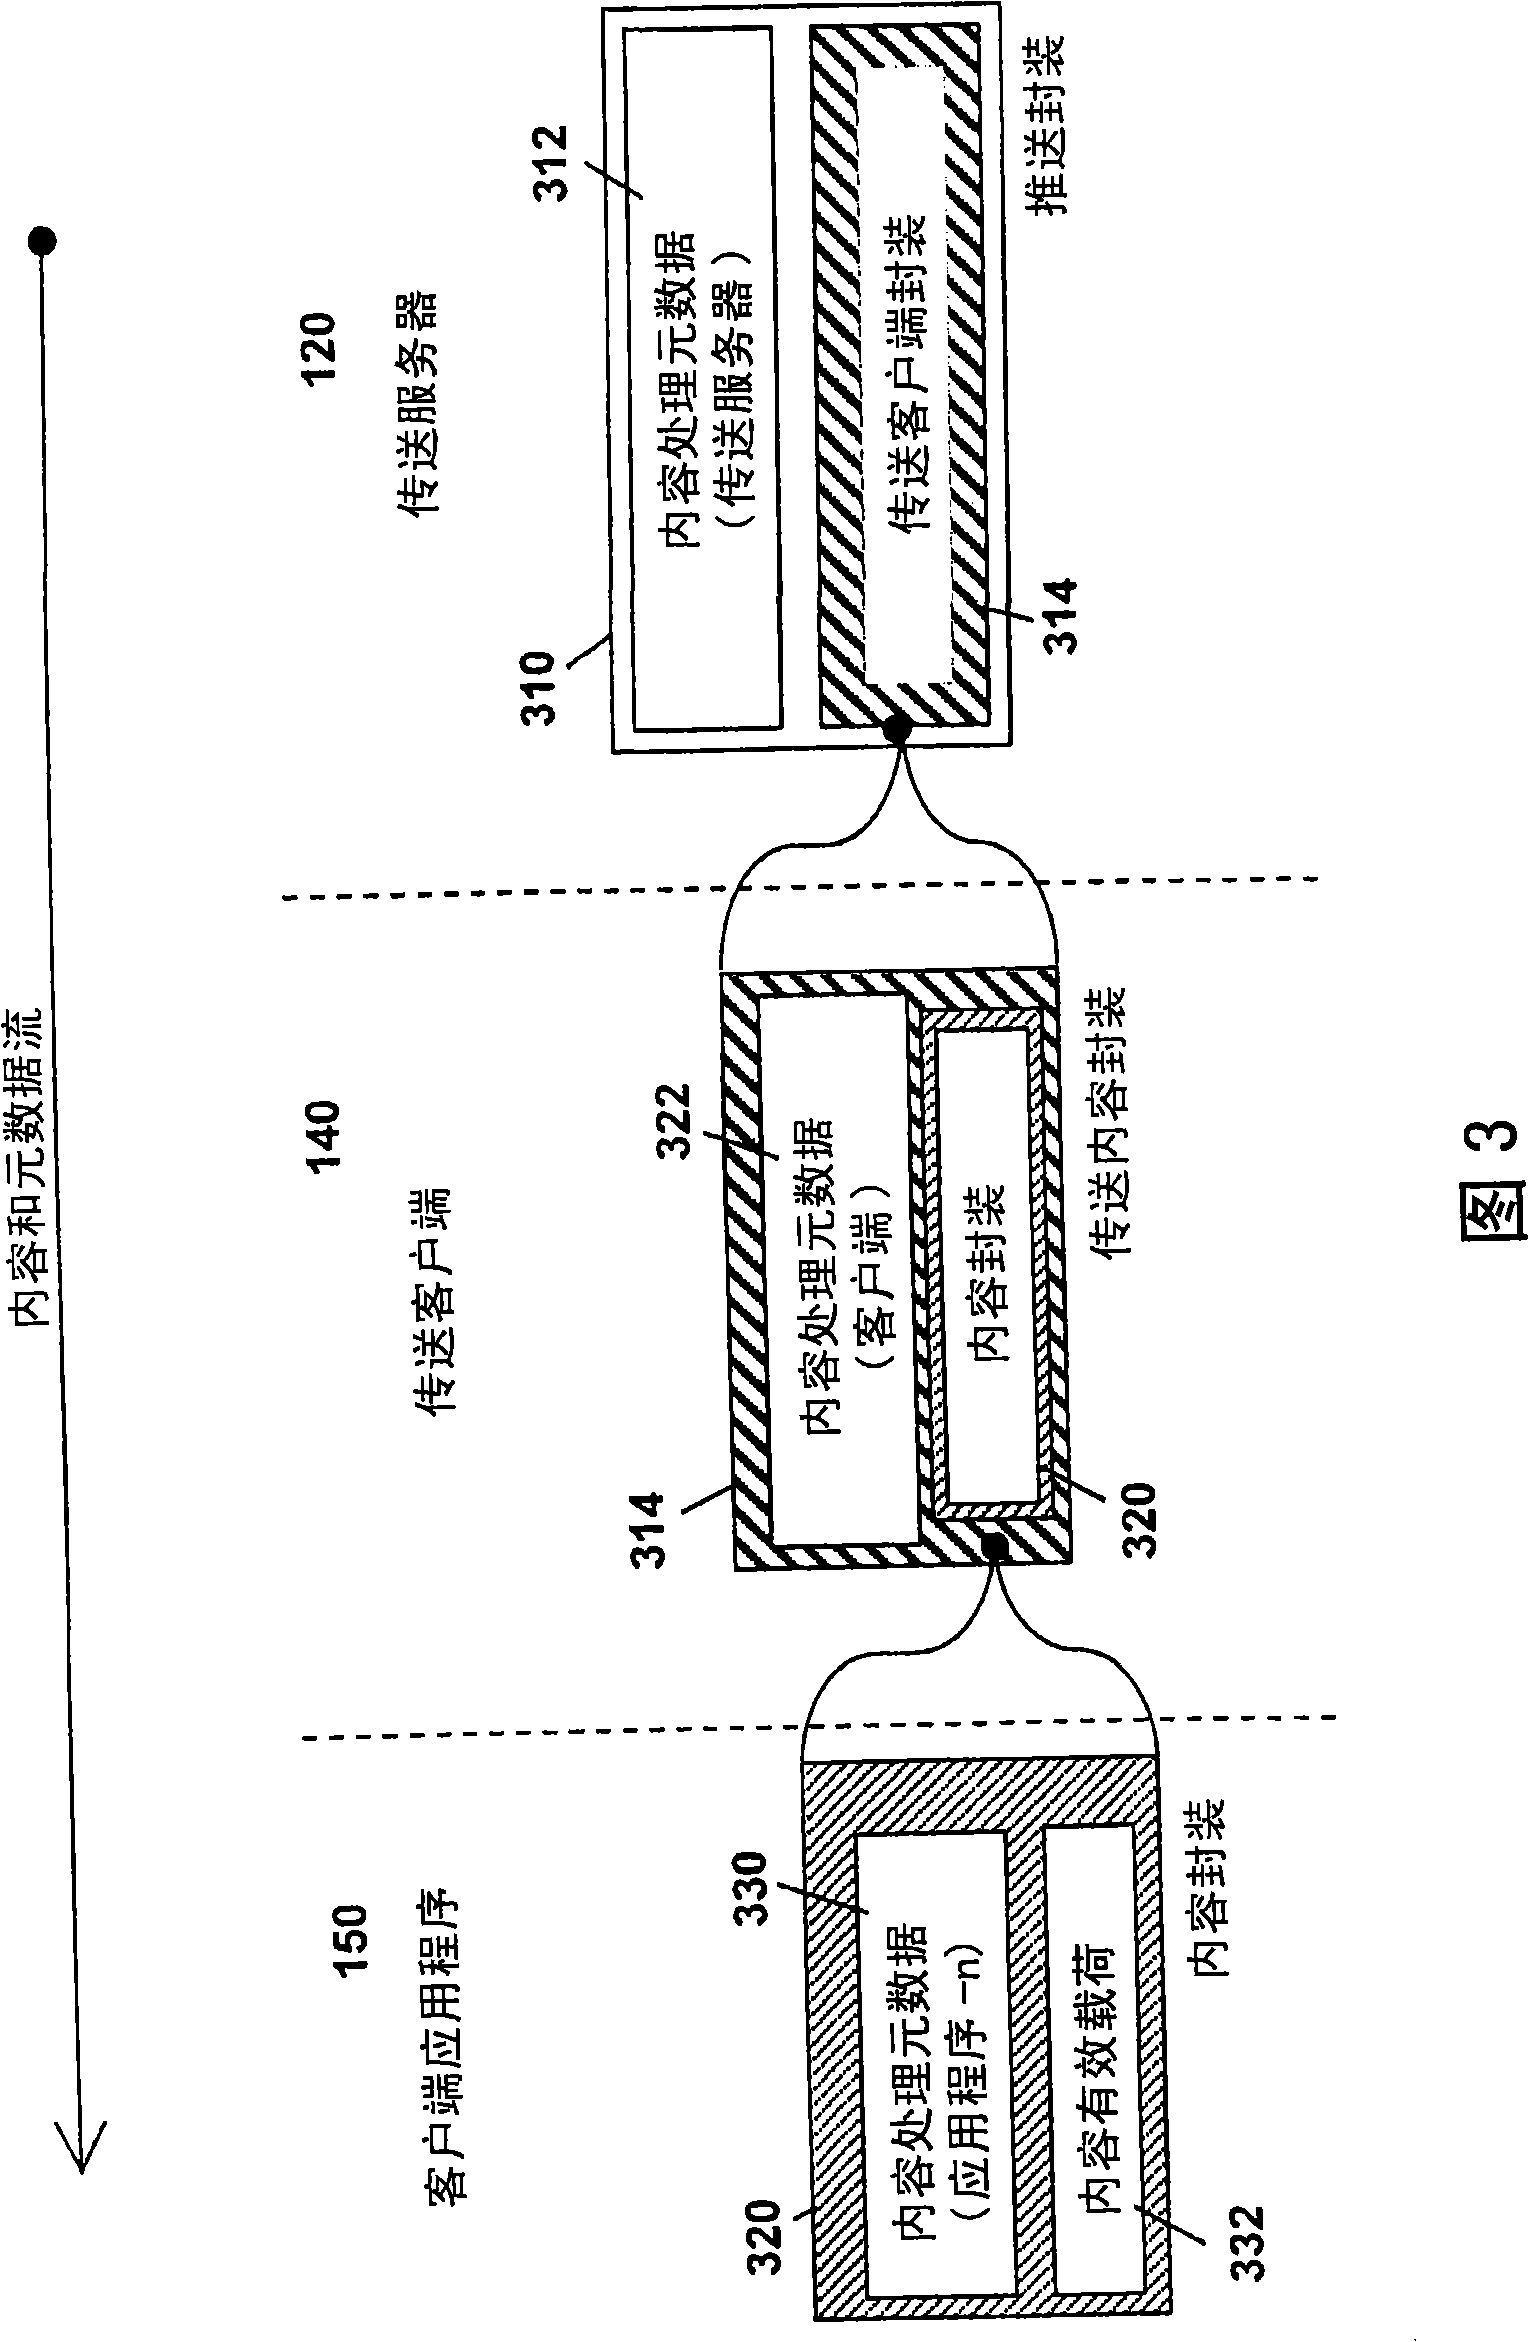 System and method for transformation of syndicated content for mobile delivery